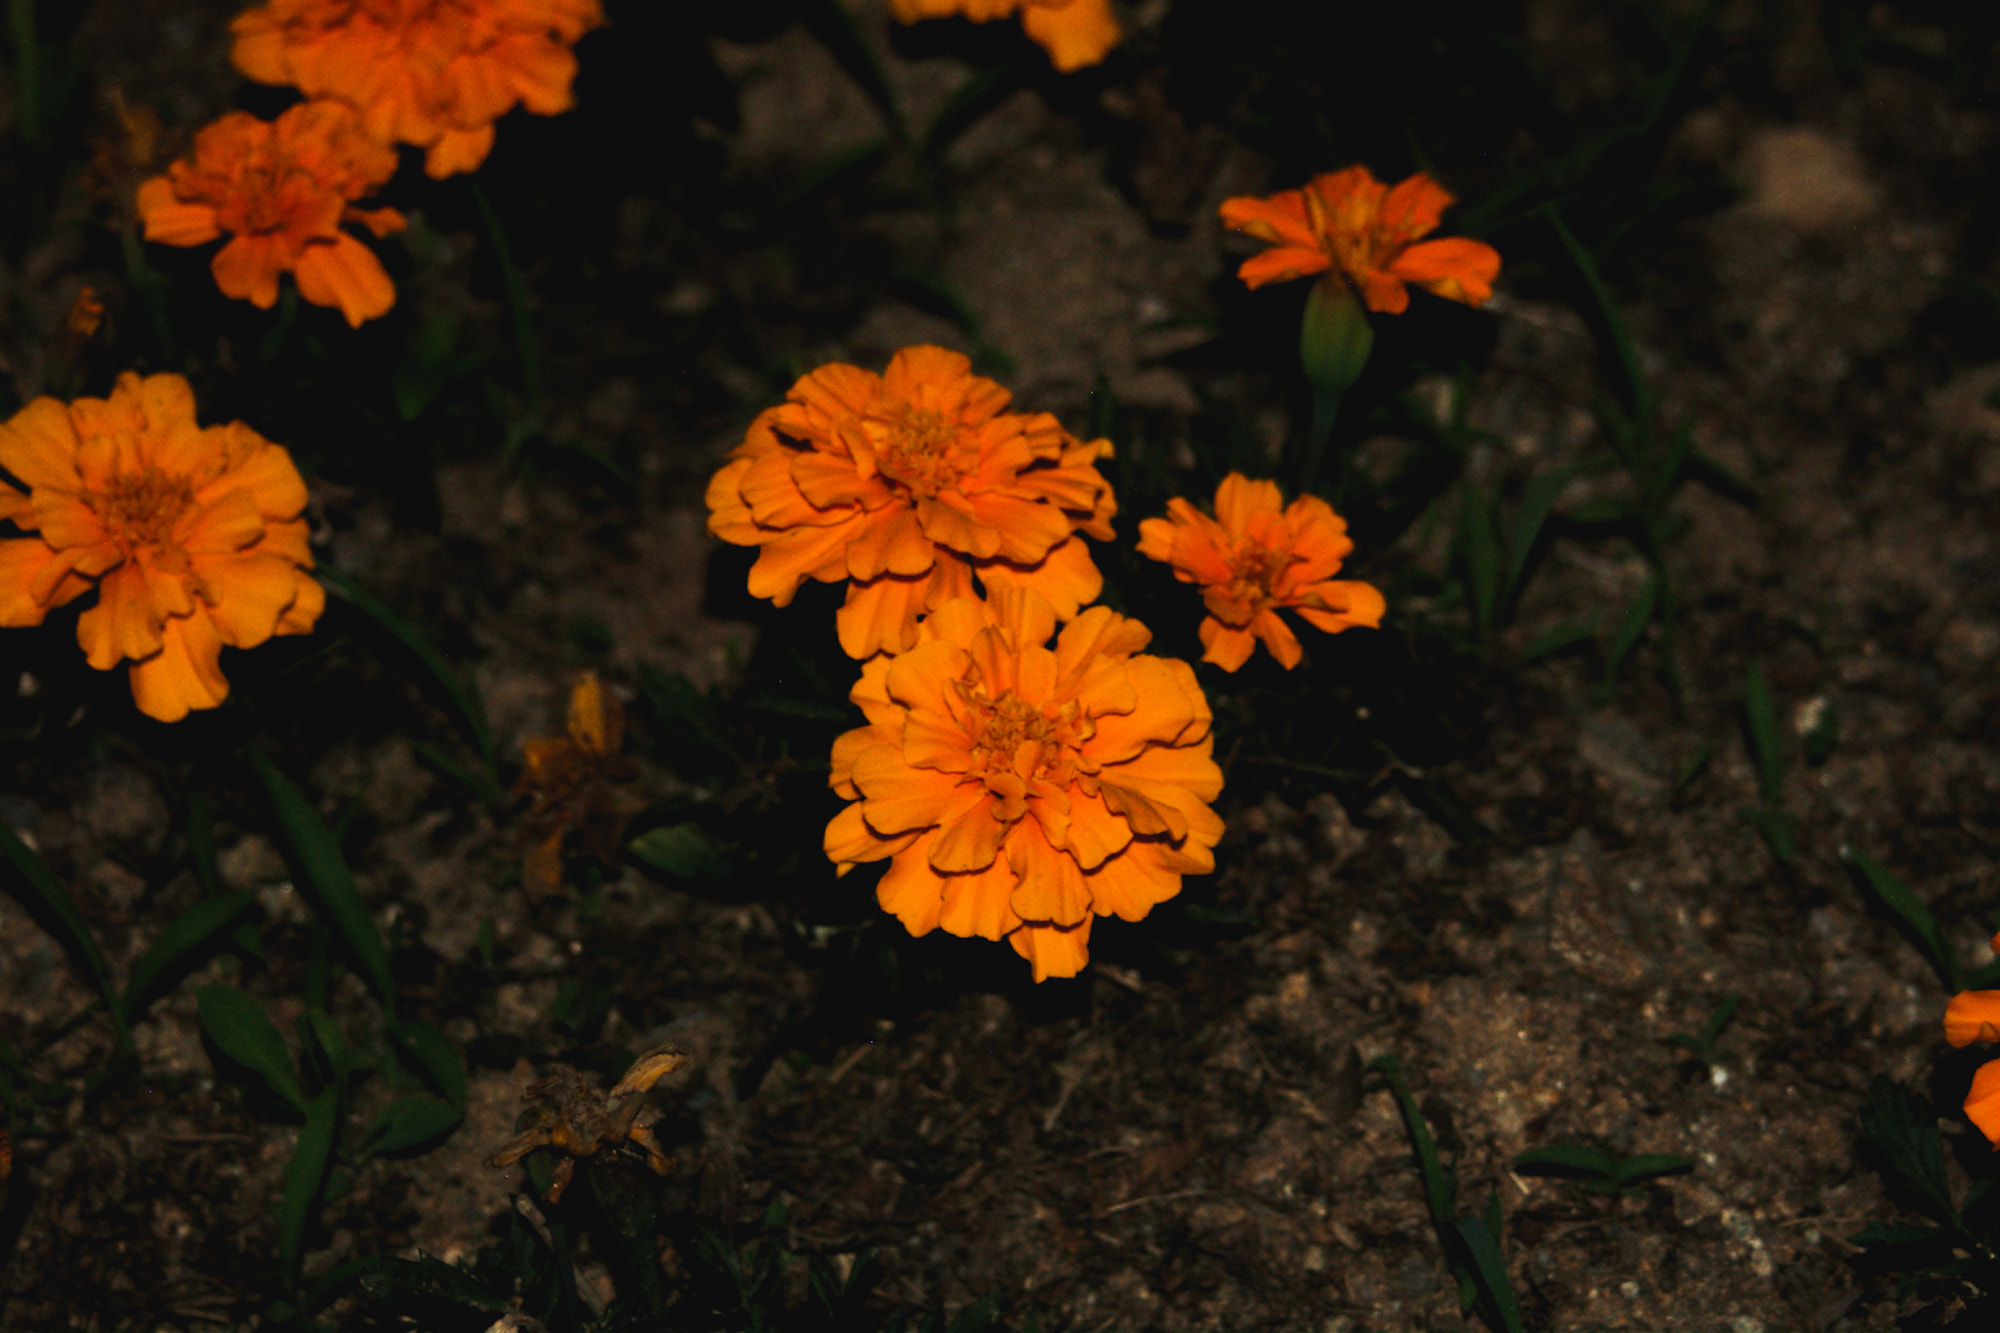 Pentax *ist D sample photo. Flowers at night vii photography